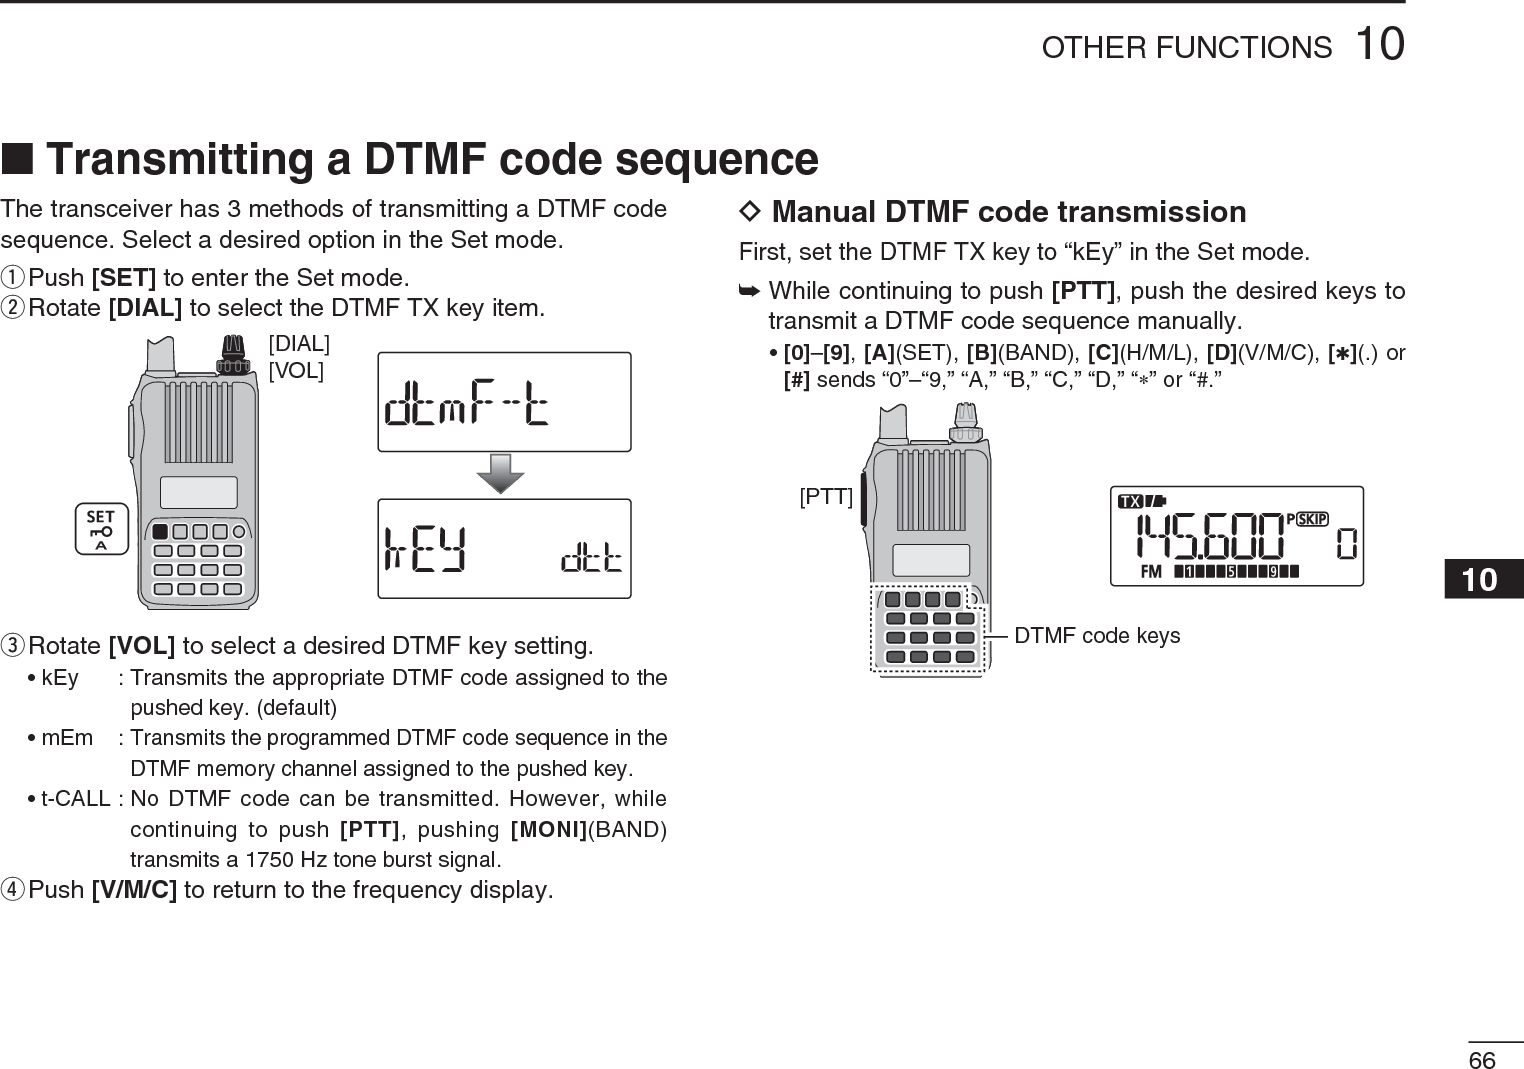 6610OTHER FUNCTIONS12345678910111213141516171819The transceiver has 3 methods of transmitting a DTMF code sequence. Select a desired option in the Set mode.q  Push [SET] to enter the Set mode.w  Rotate [DIAL] to select the DTMF TX key item.[VOL][DIAL]e  Rotate [VOL] to select a desired DTMF key setting.• kEy : Transmits the appropriate DTMF code assigned to the pushed key. (default)• mEm :Transmits the programmed DTMF code sequence in the DTMF memory channel assigned to the pushed key.• t-CALL : No DTMF code can be transmitted. However, while continuing to push [PTT], pushing [MONI](BAND) transmits a 1750 Hz tone burst signal.rPush [V/M/C] to return to the frequency display.DManual DTMF code transmissionFirst, set the DTMF TX key to “kEy” in the Set mode.±While continuing to push [PTT], push the desired keys to transmit a DTMF code sequence manually.•[0]–[9],[A](SET), [B](BAND), [C](H/M/L), [D](V/M/C), [1](.) or [#] sends “0”–“9,” “A,” “B,” “C,” “D,” “” or “#.”[PTT]DTMF code keysN Transmitting a DTMF code sequence